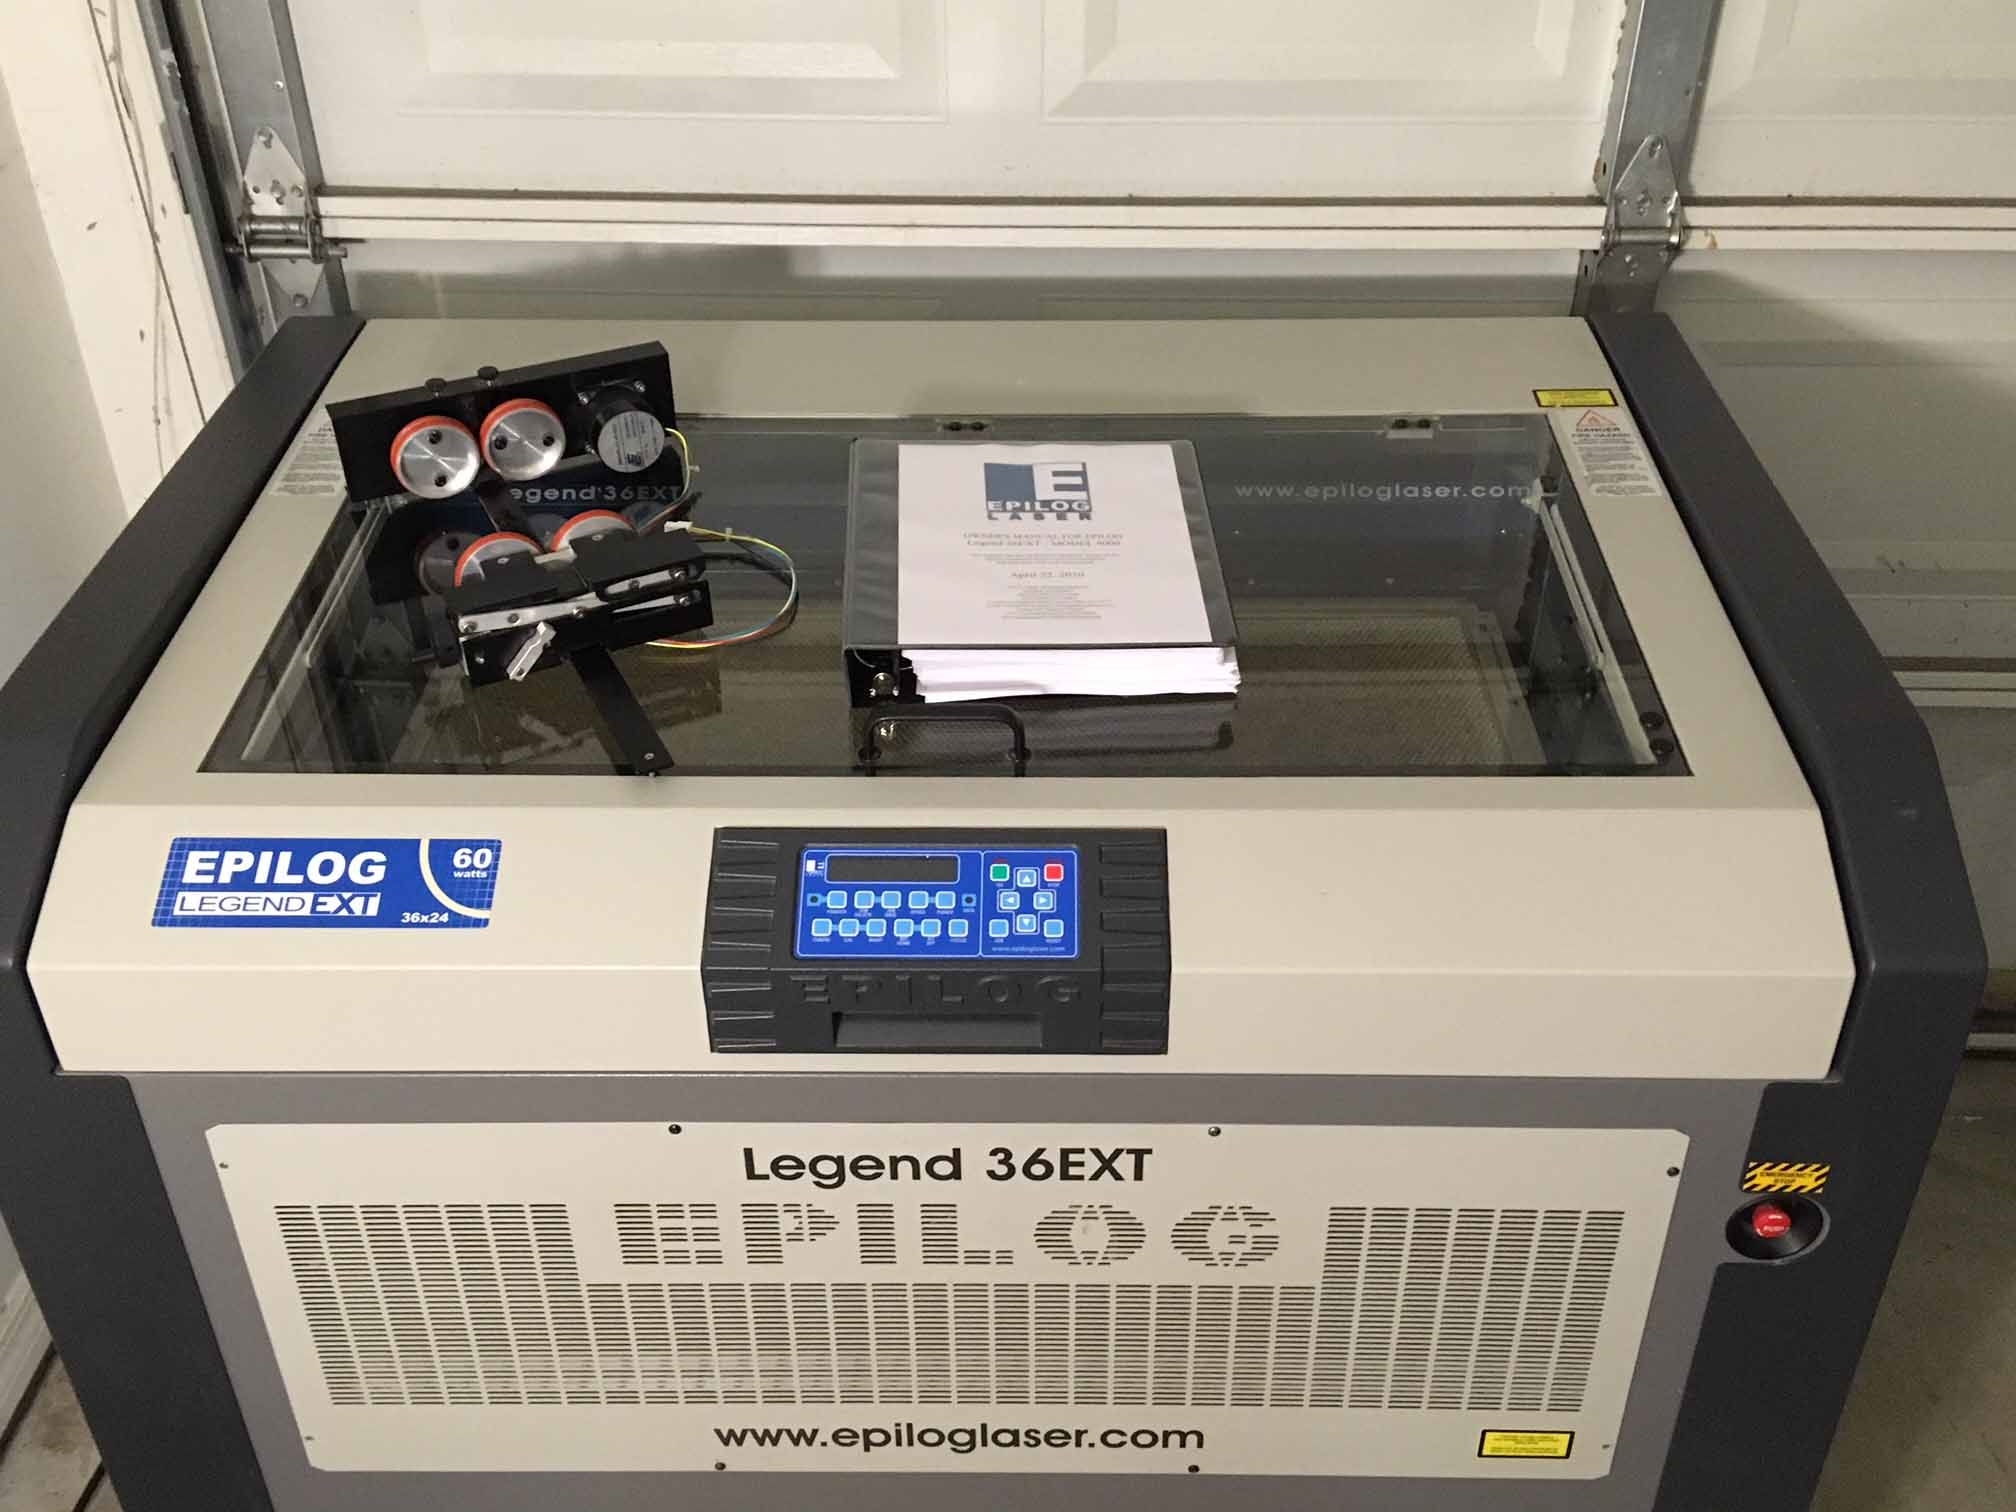 Epilog Laser Legend 36ext Laser Used For Sale Price 9210954 2010 Buy From Cae Cutting of various material thicknesses and combinations in one operation 3. epilog laser legend 36ext laser used